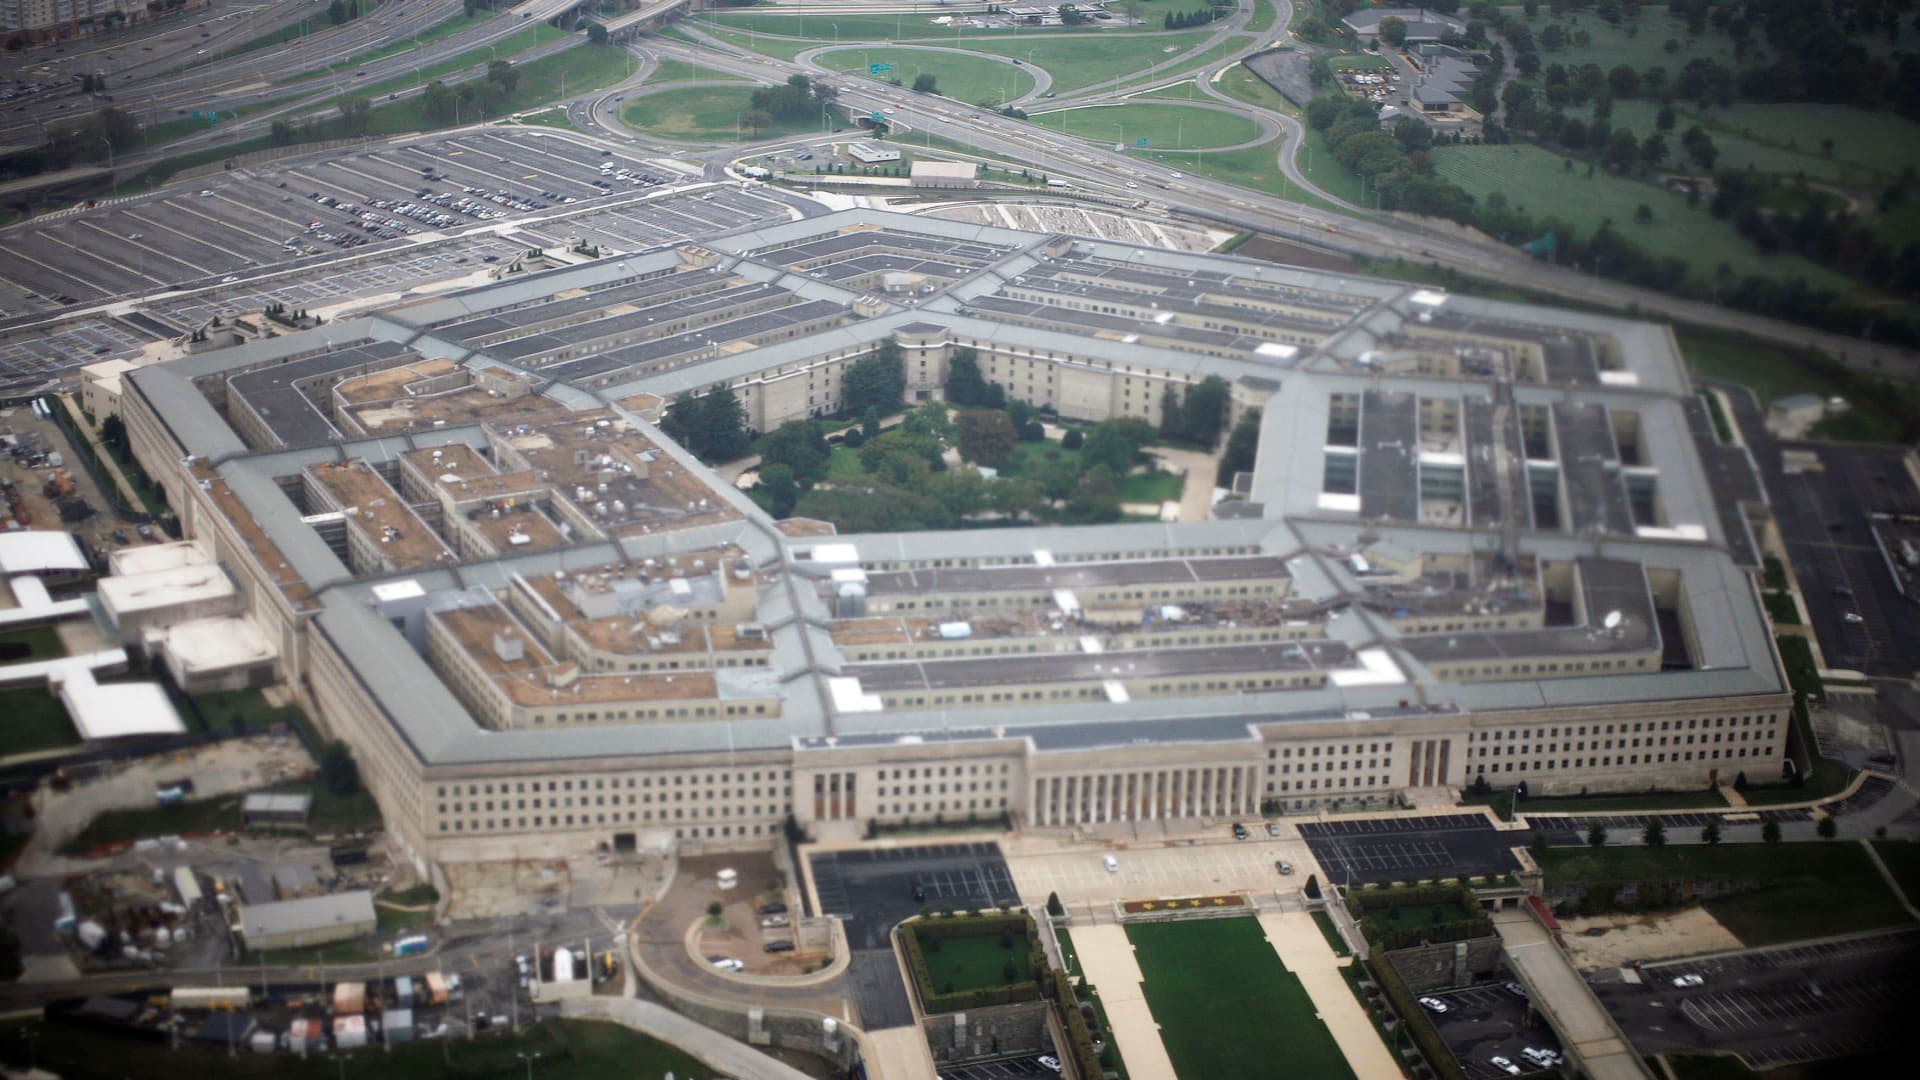 Aerial view of the United States military headquarters, the Pentagon.